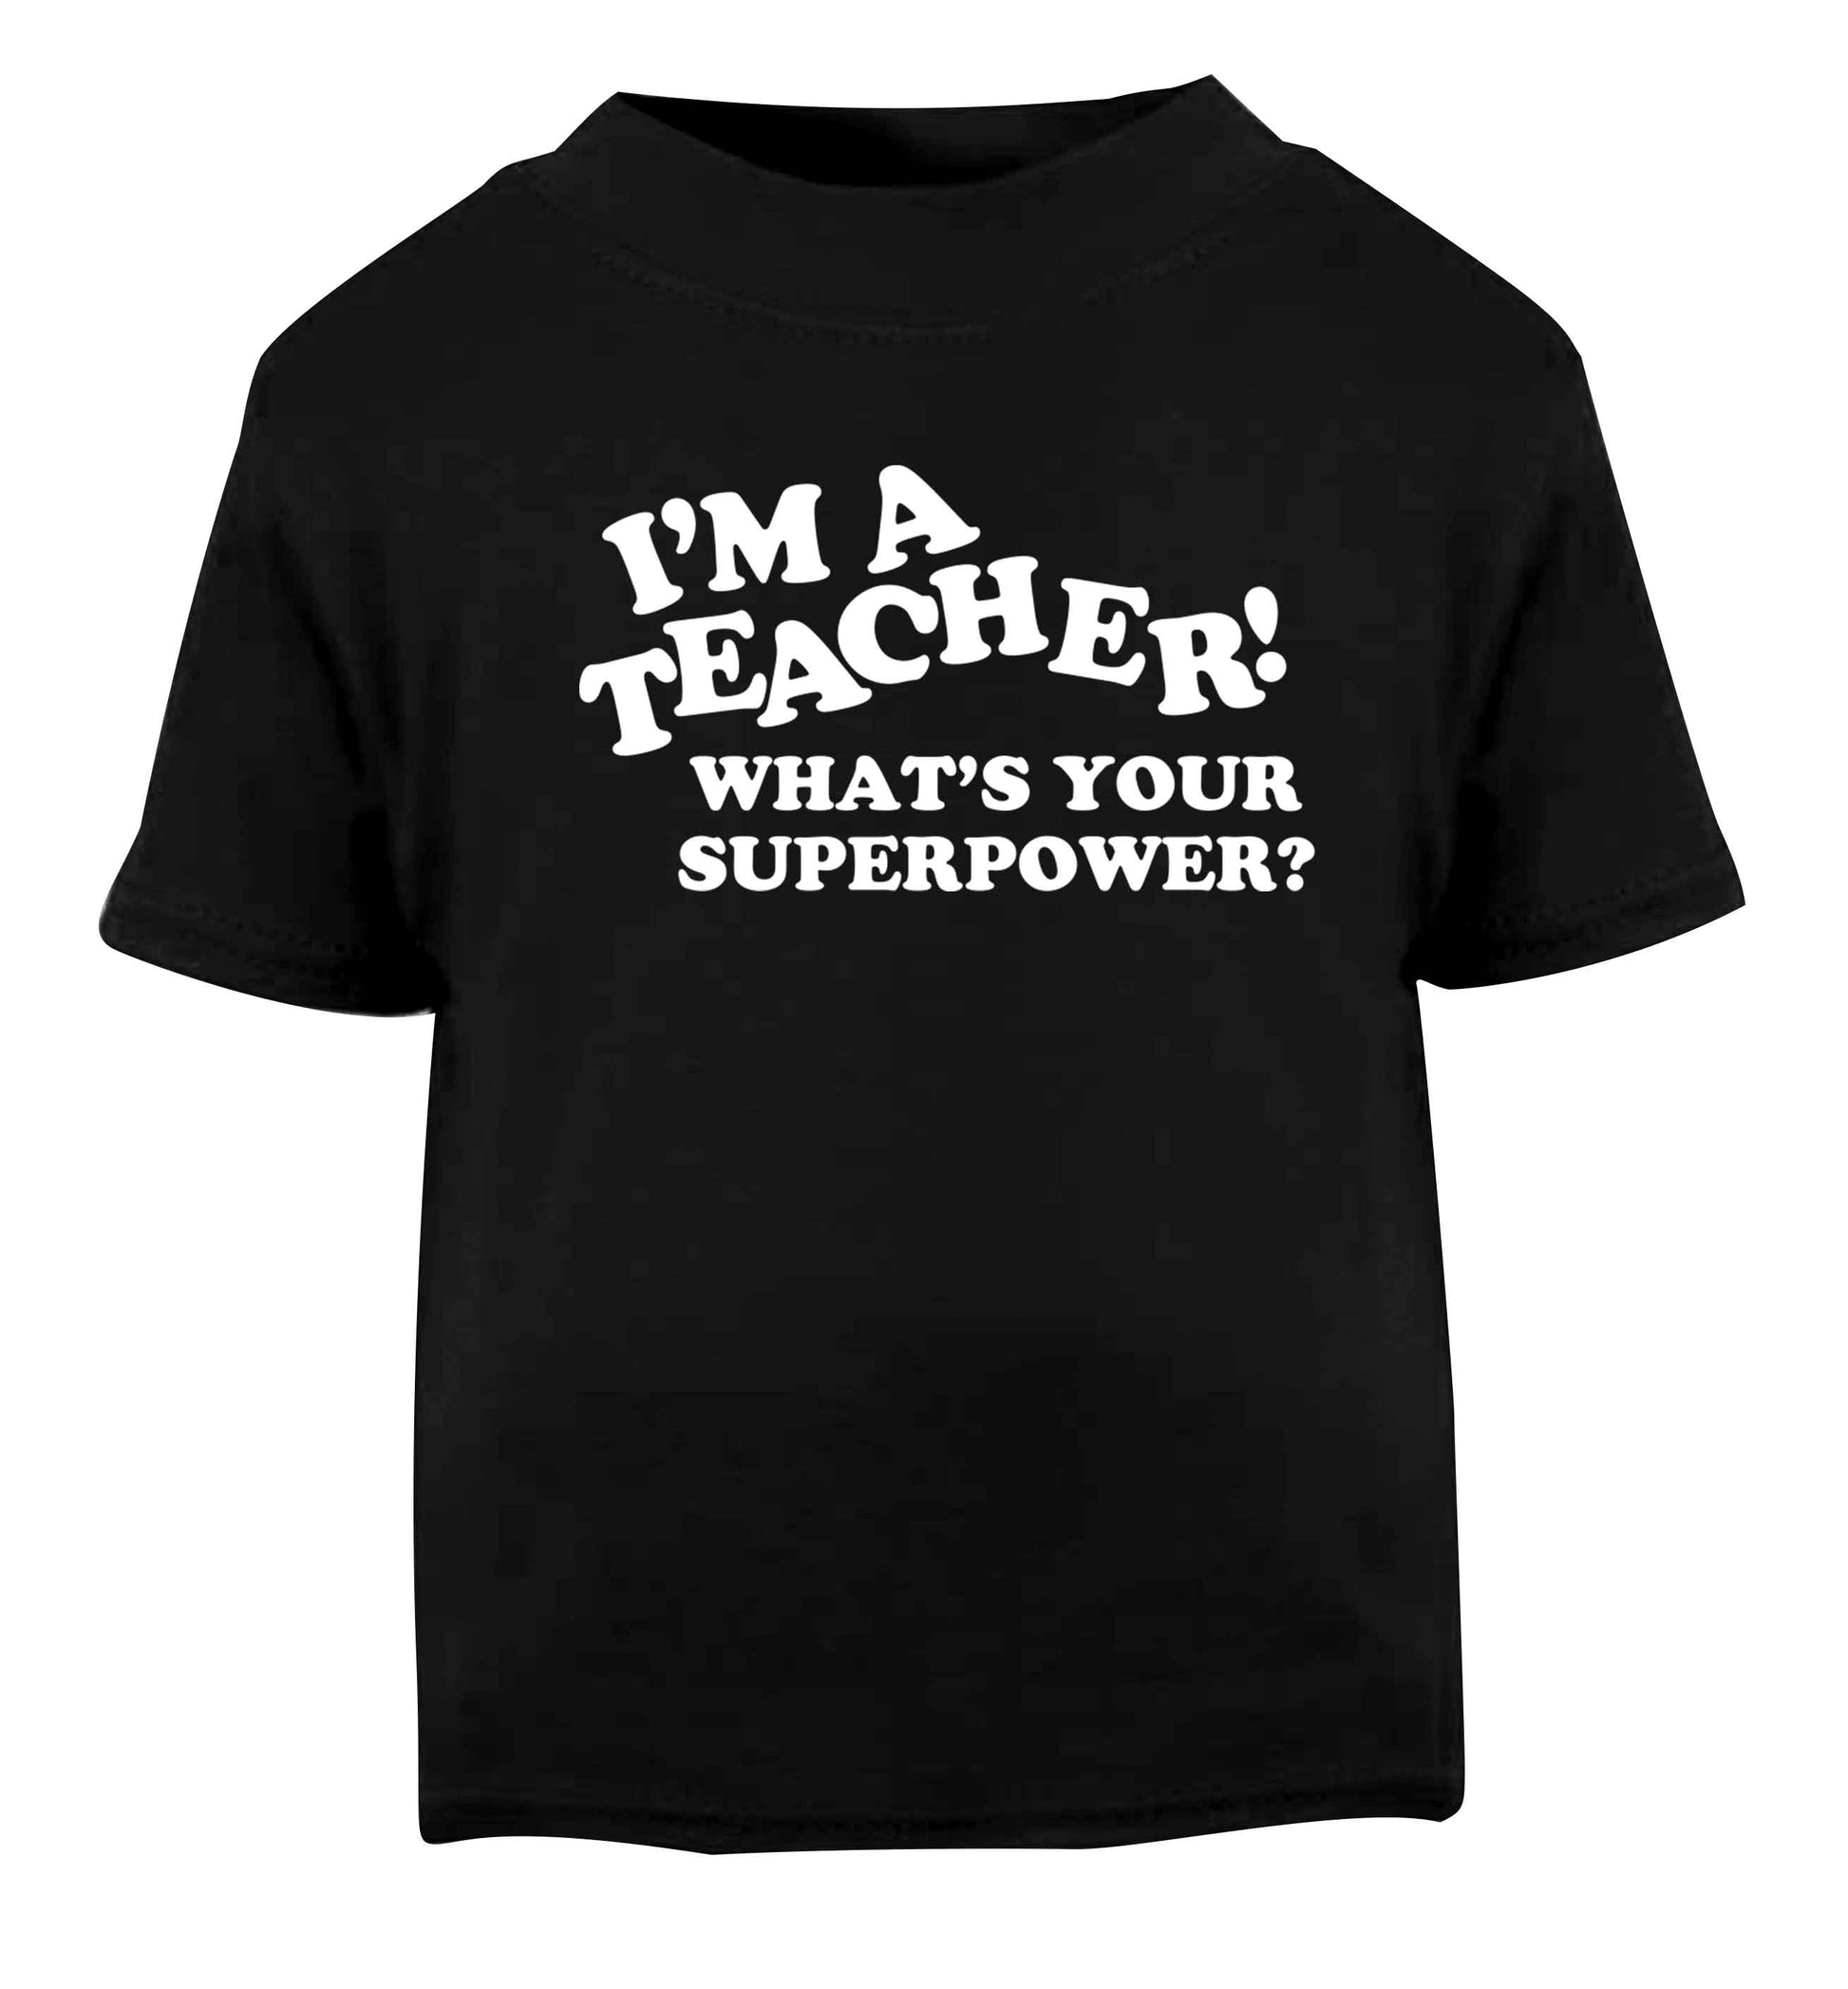 I'm a teacher what's your superpower?! Black baby toddler Tshirt 2 years